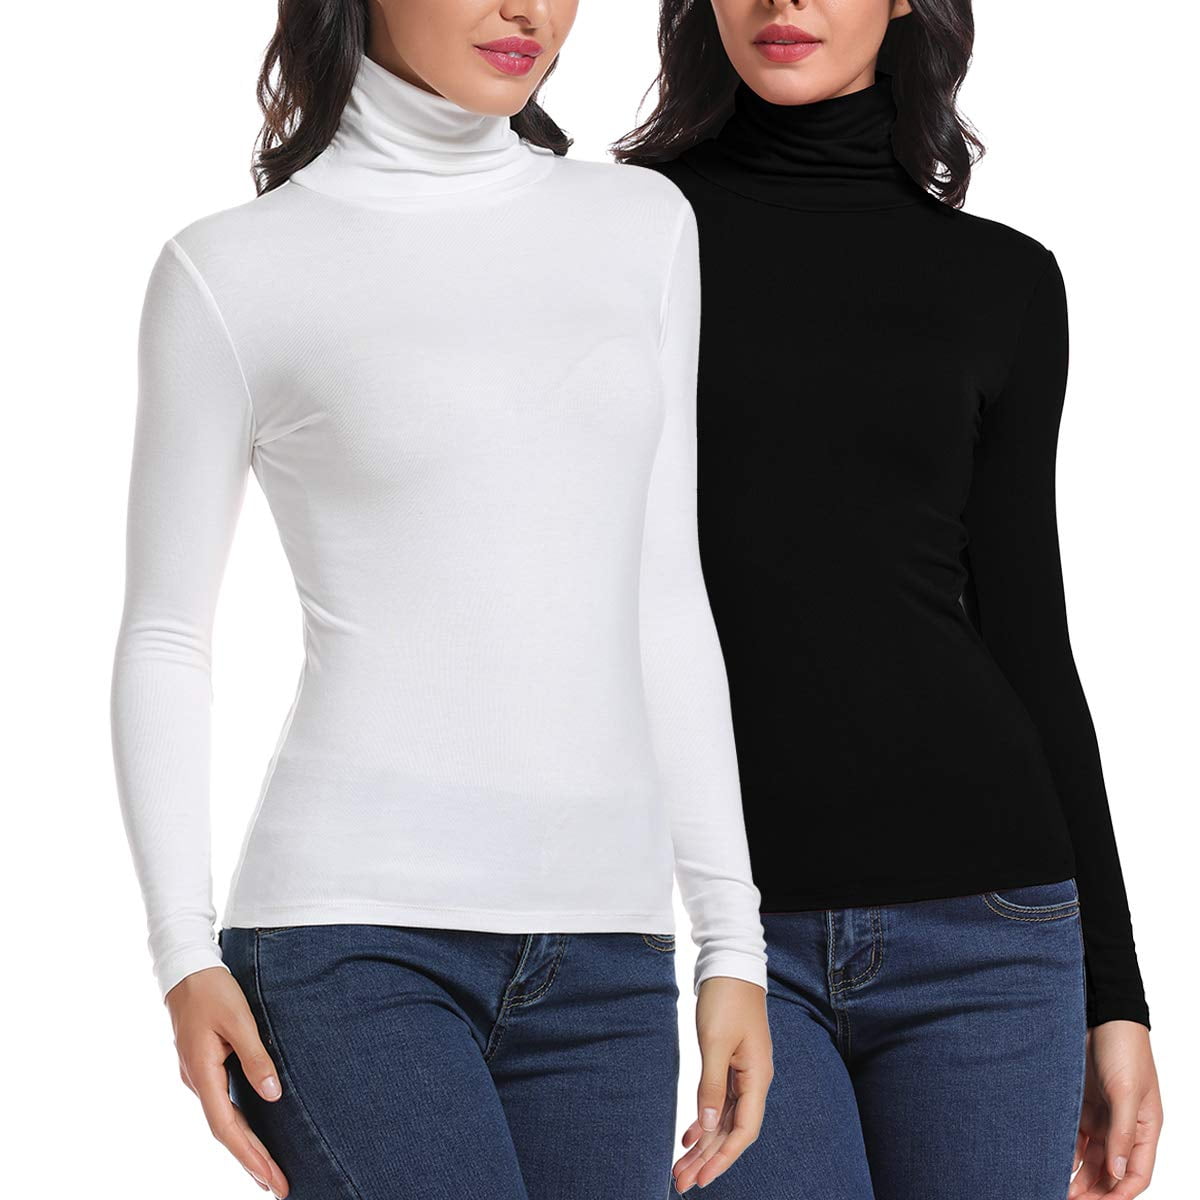 Anyfit Wear 2 Packs Long Sleeve Mock Turtleneck Stretch Slim Fitted Layer  Basic Tee Tops Black-White M 